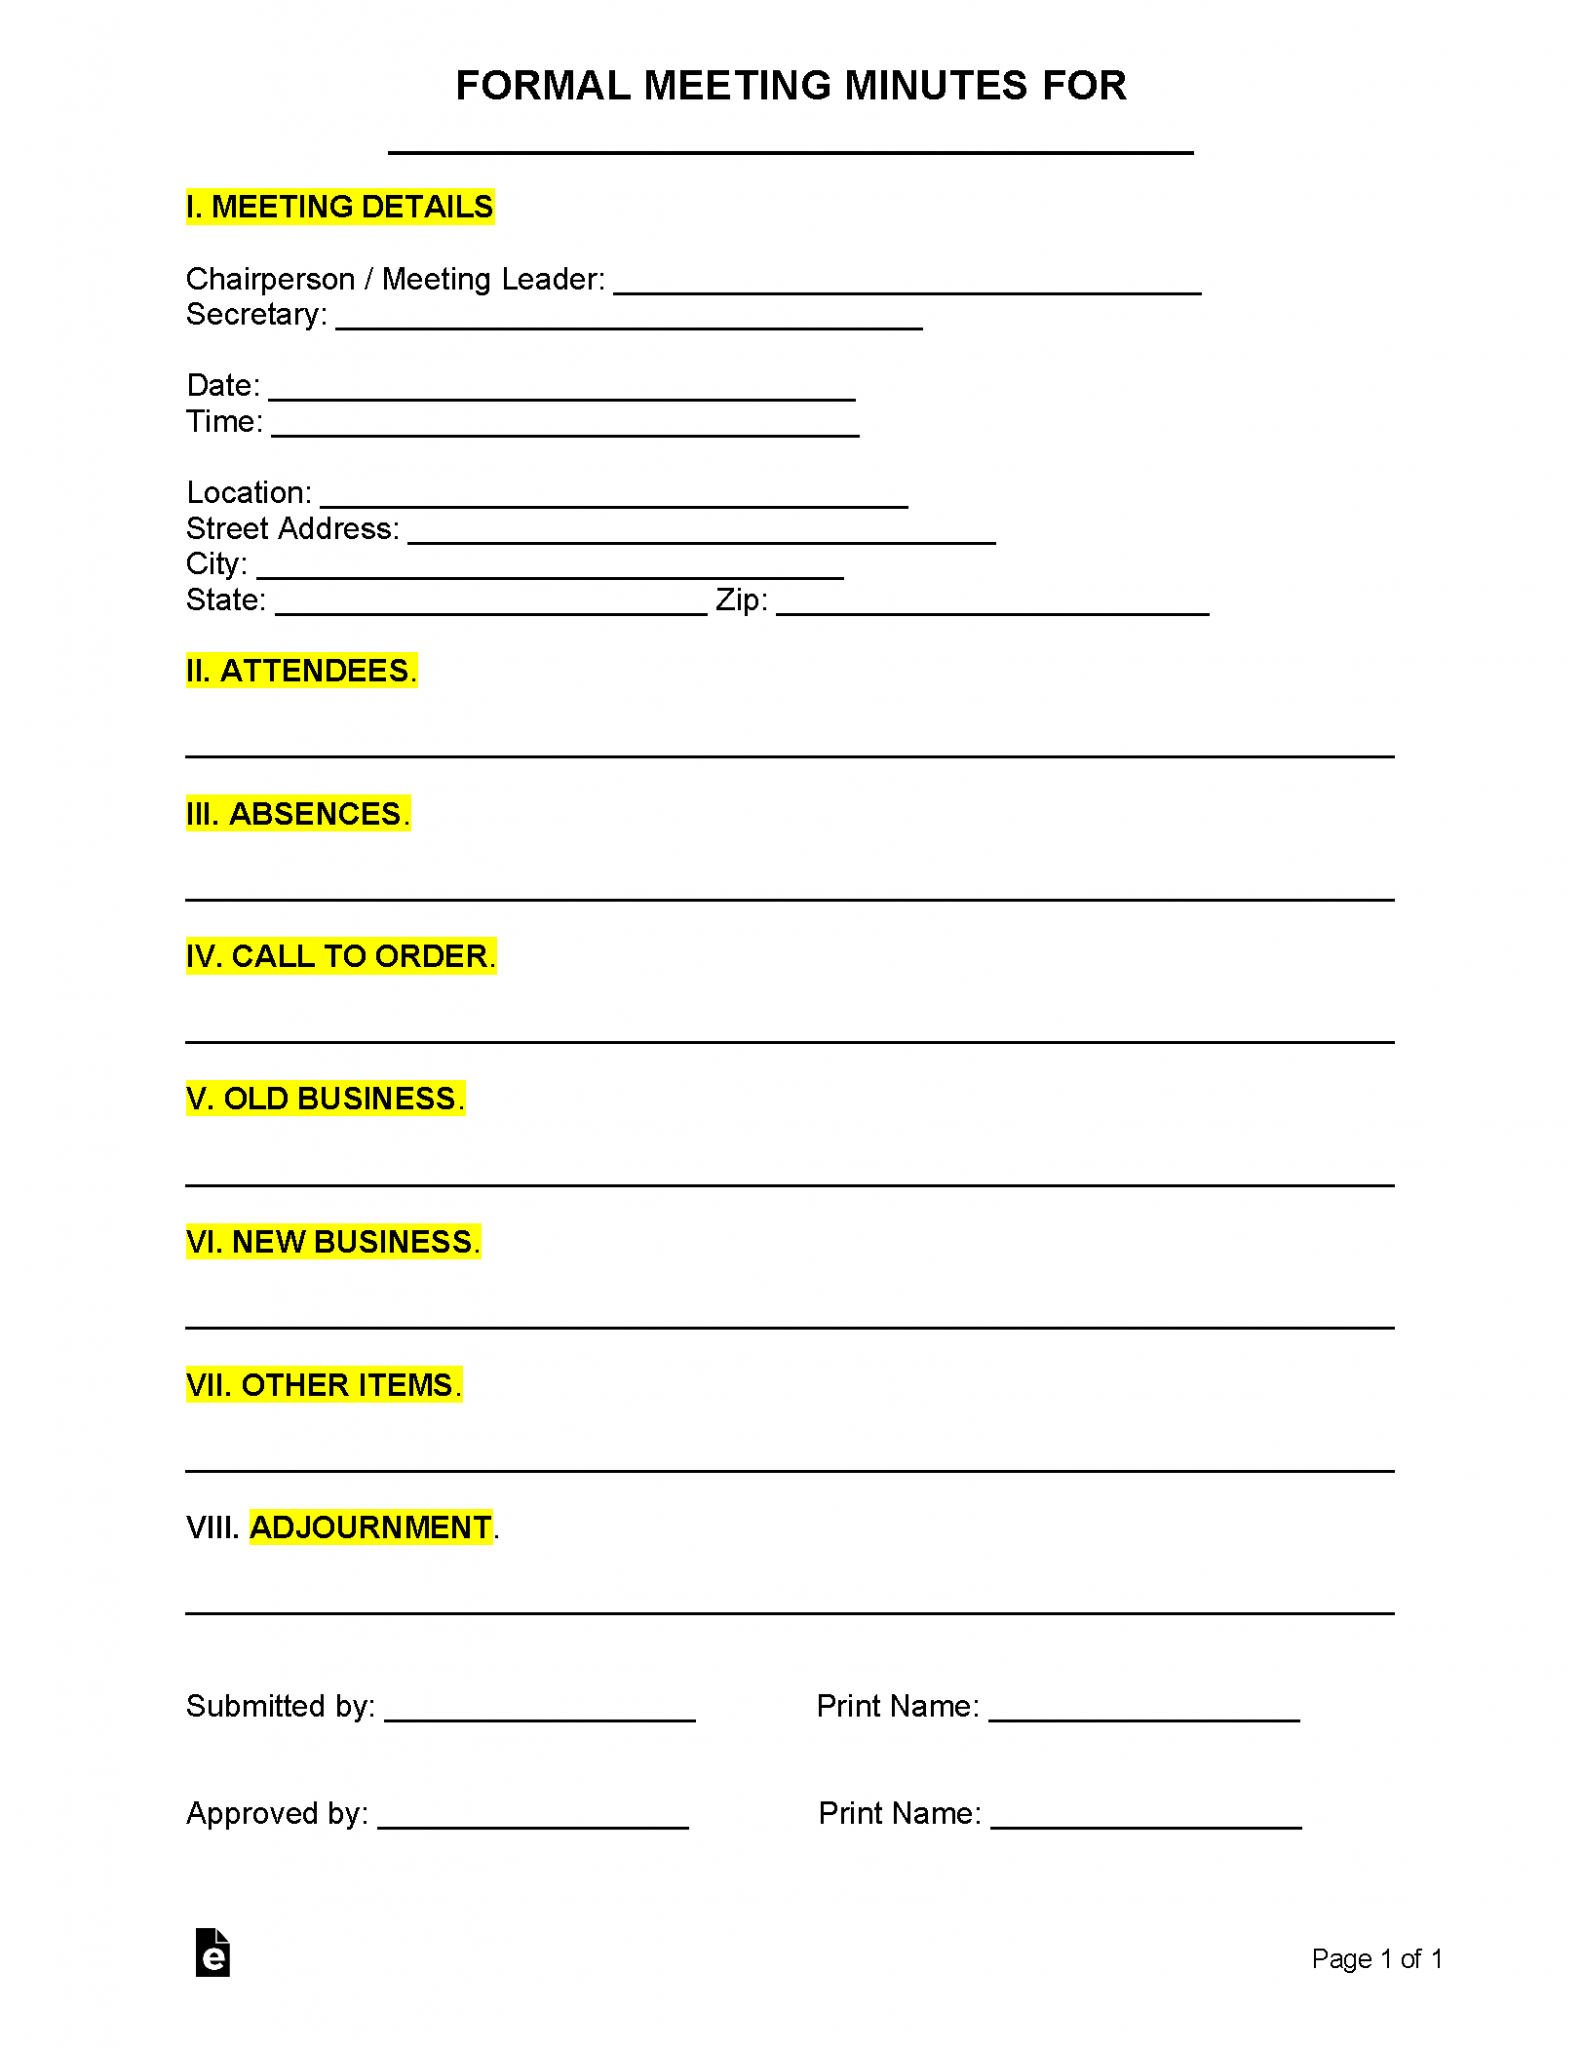 free-meeting-minutes-template-riset